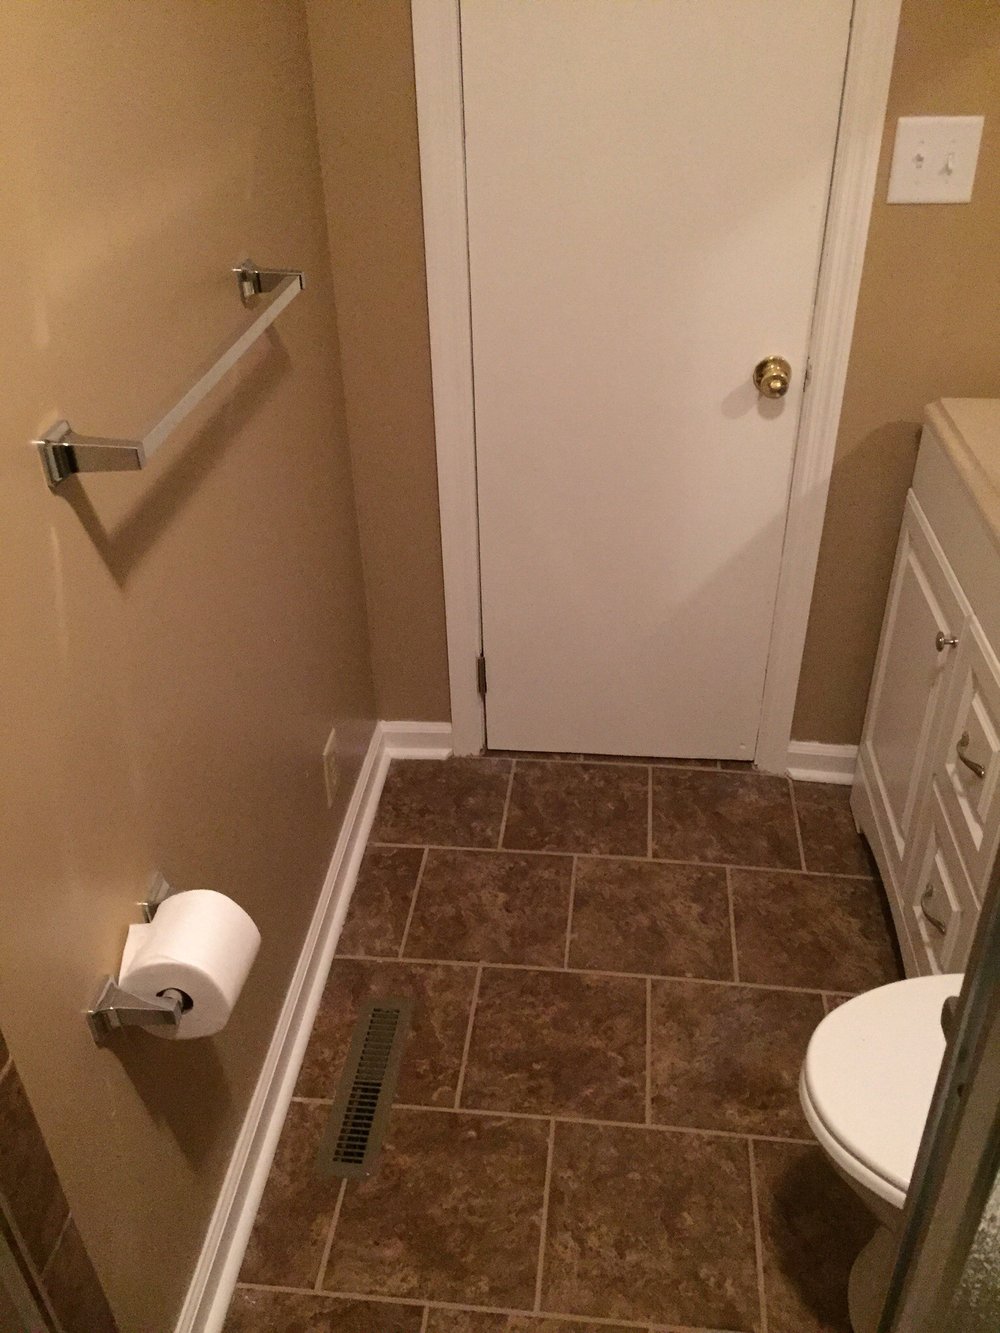 Bathroom from Causey's Flooring Center in South Carolina